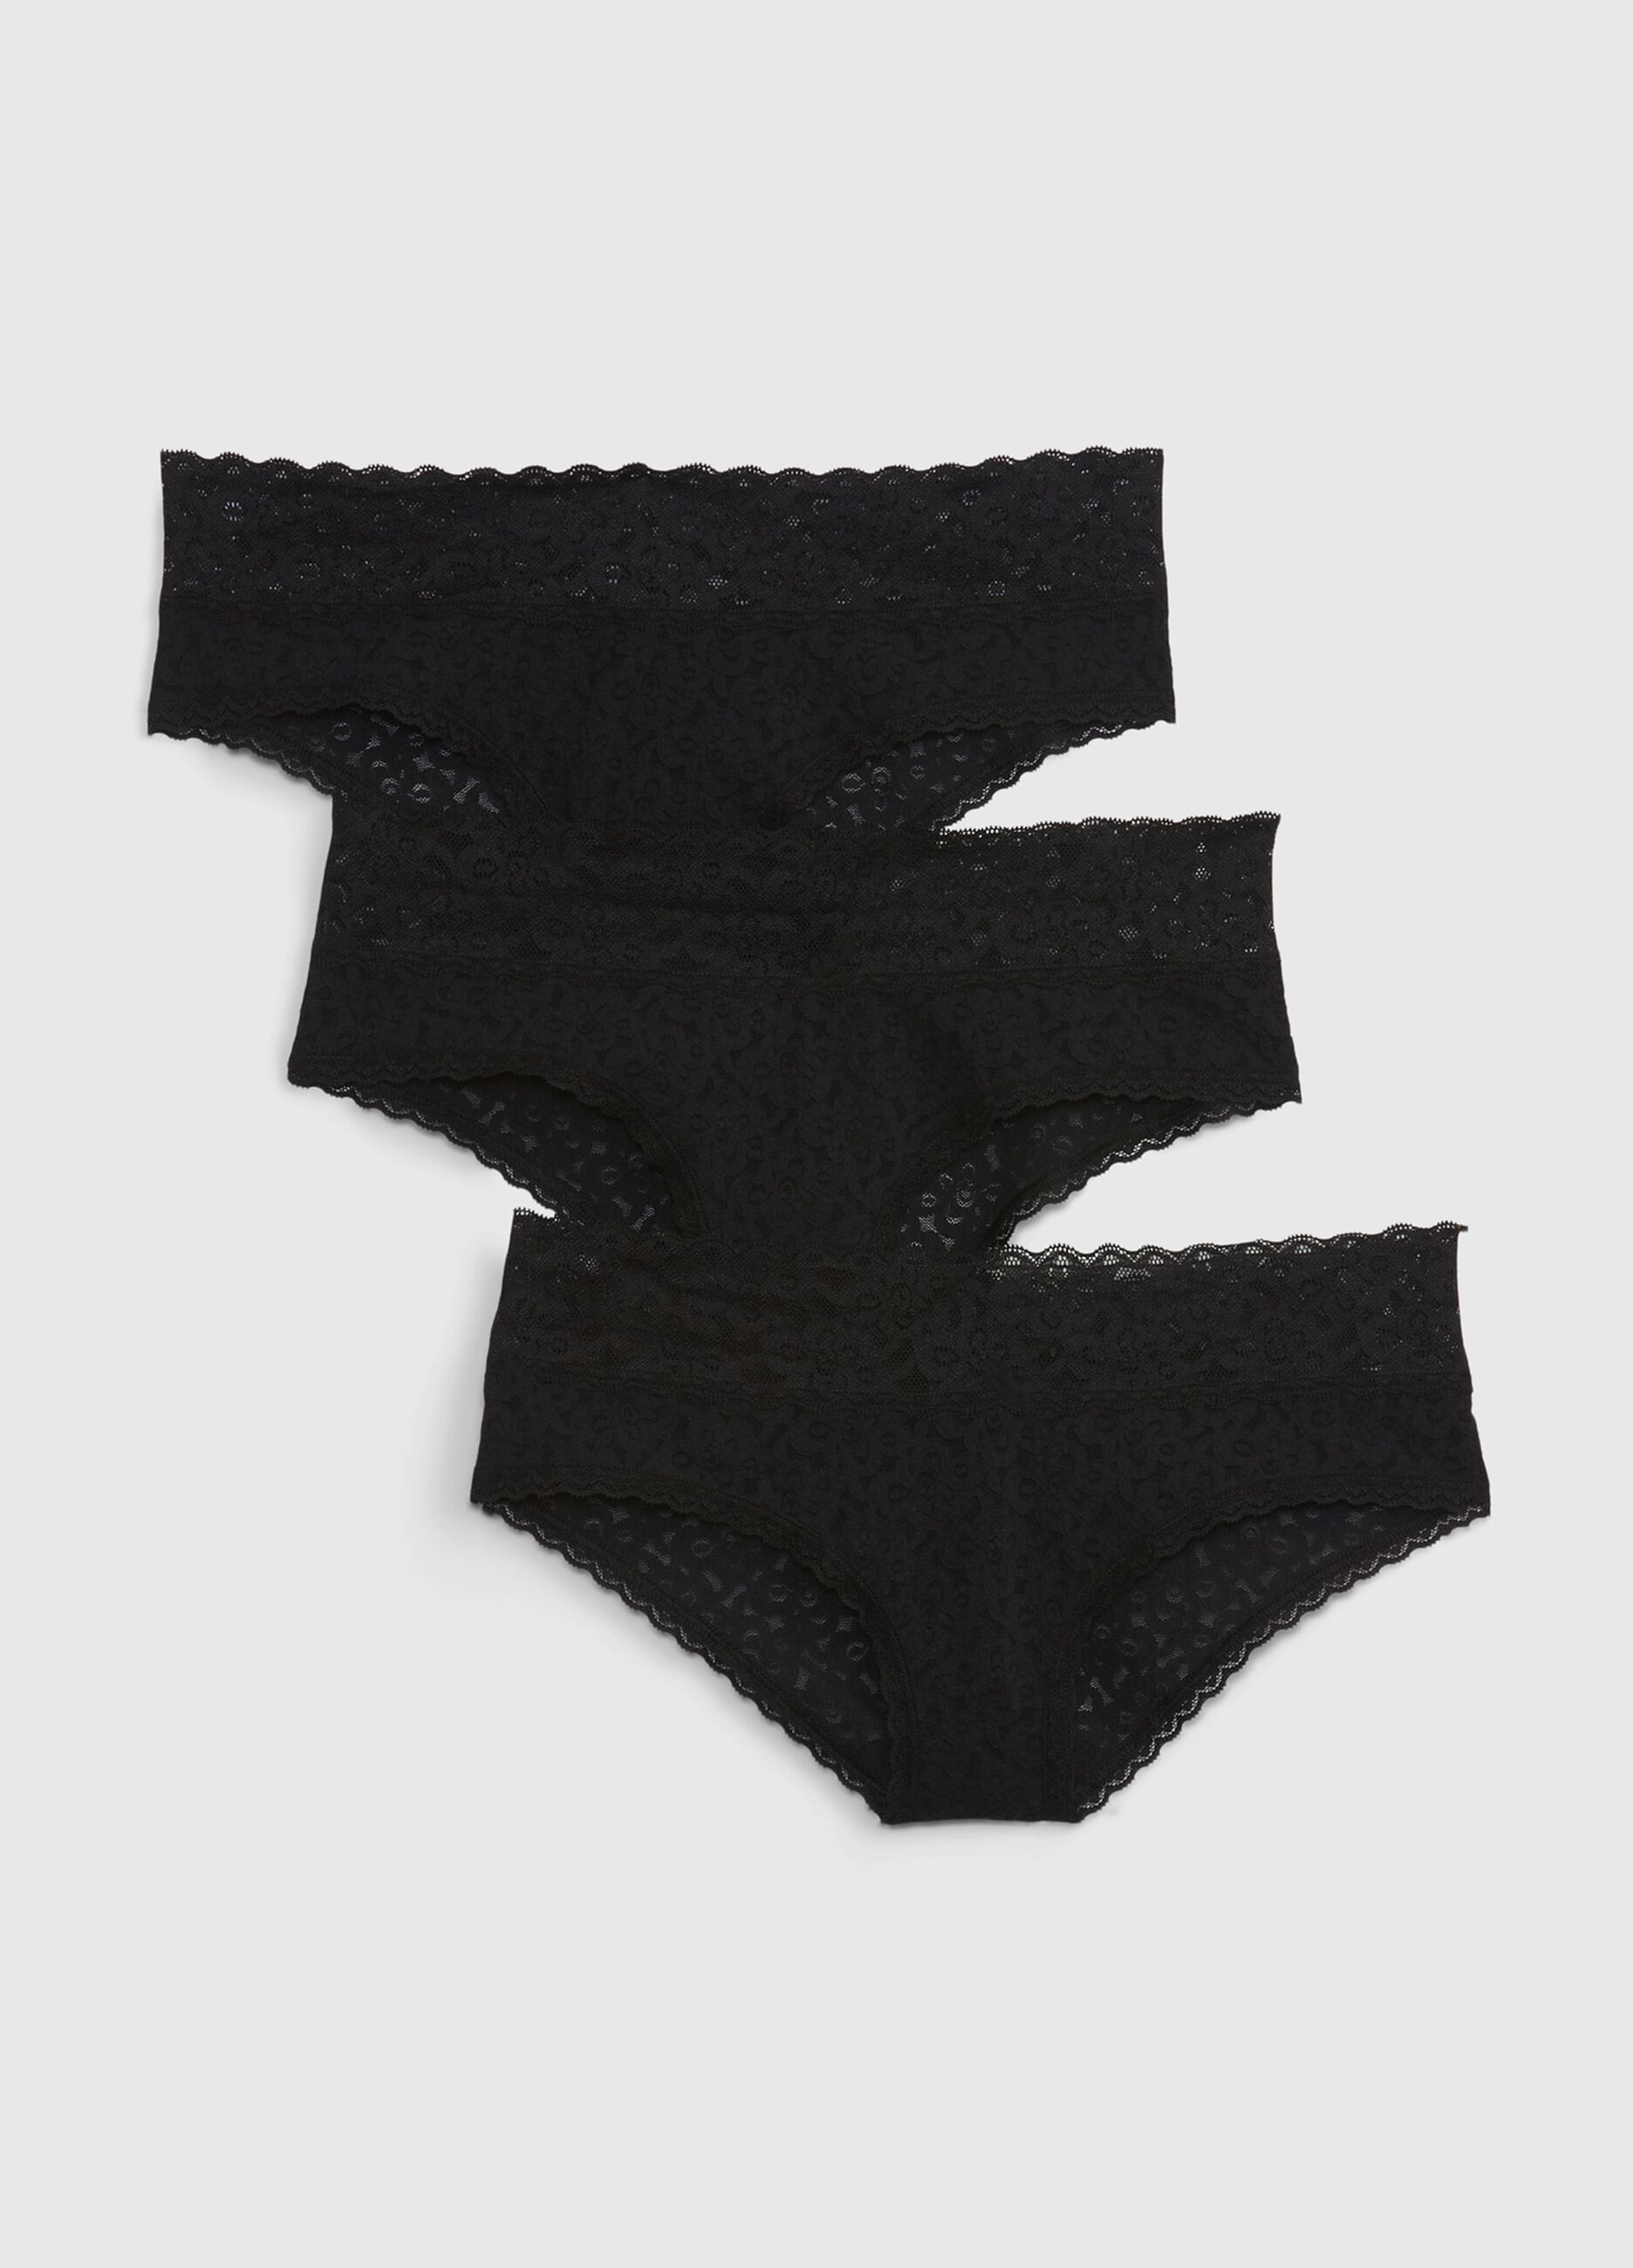 Three-pack French knickers in lace